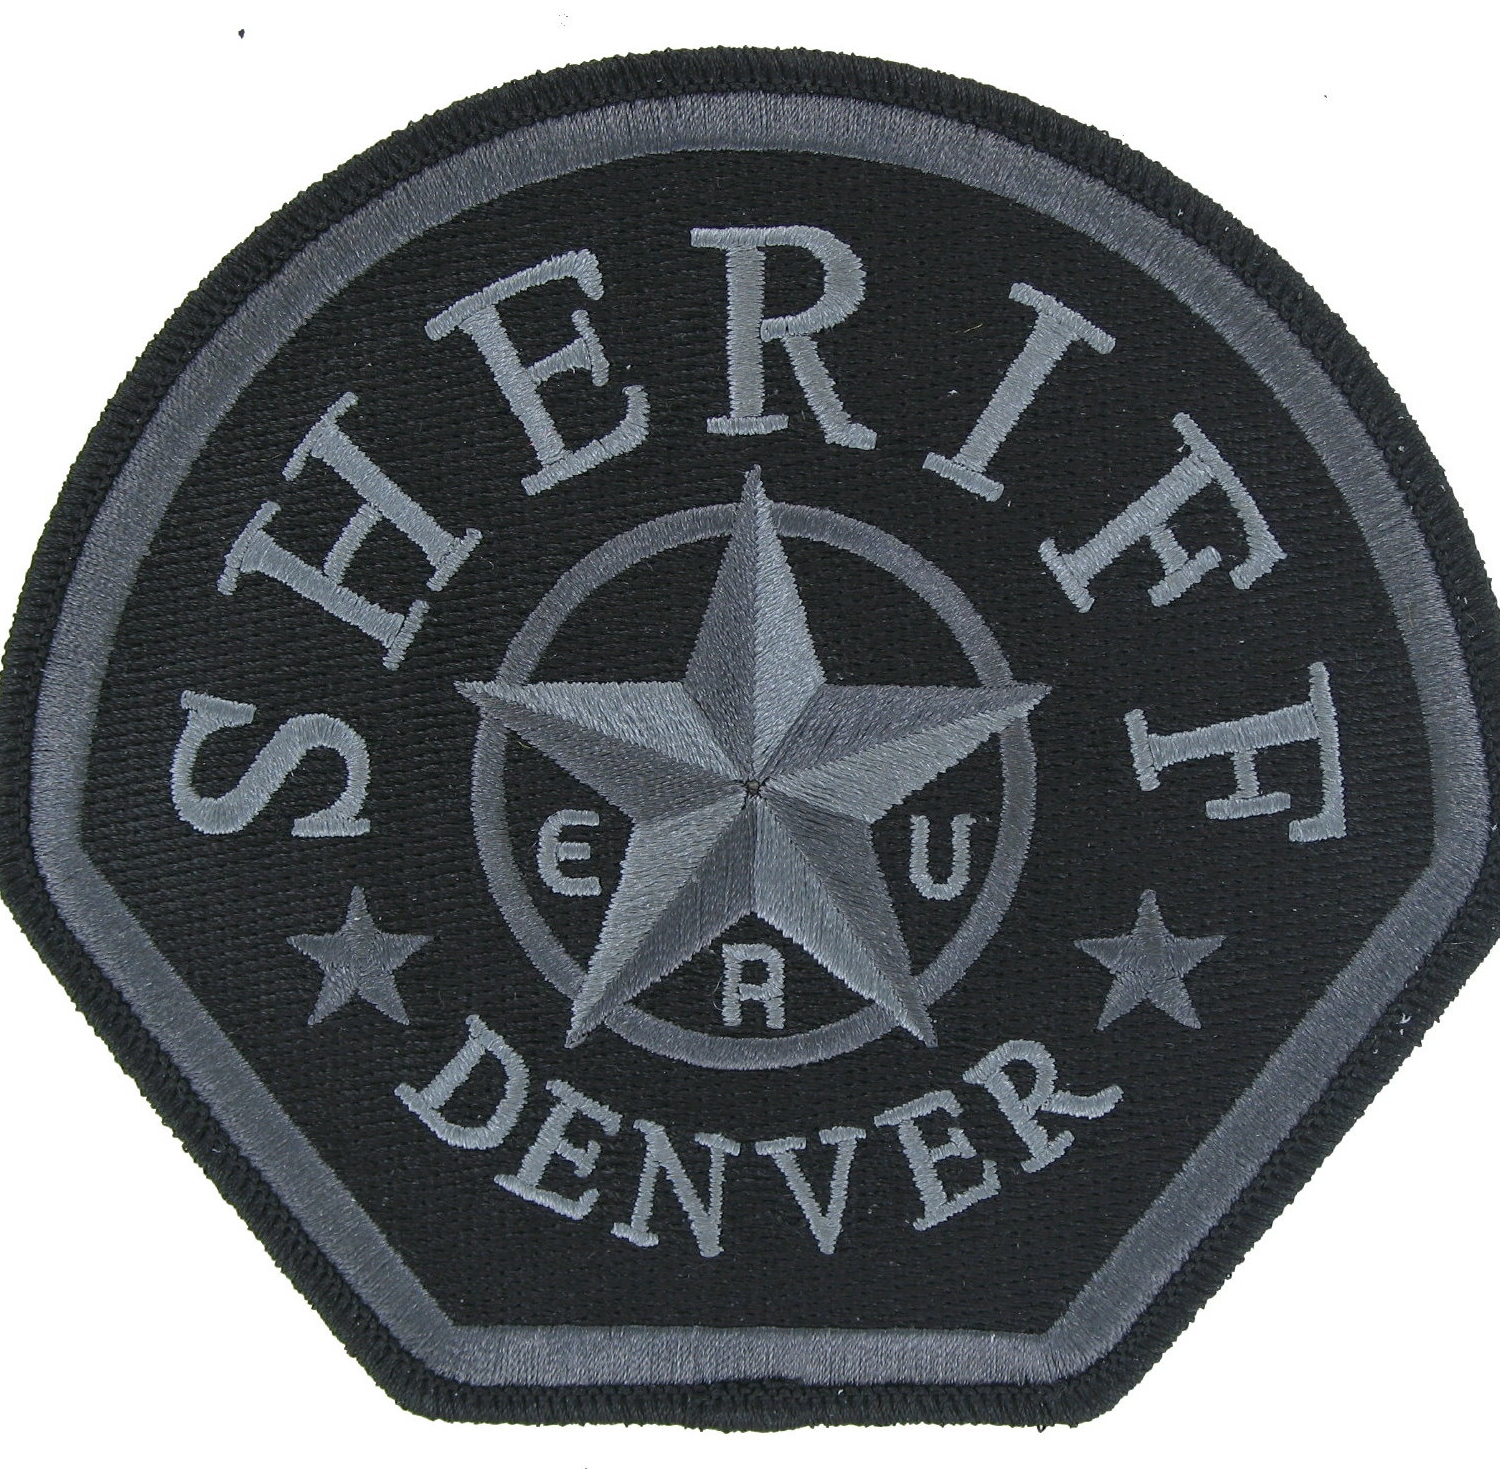 Sheriff patches